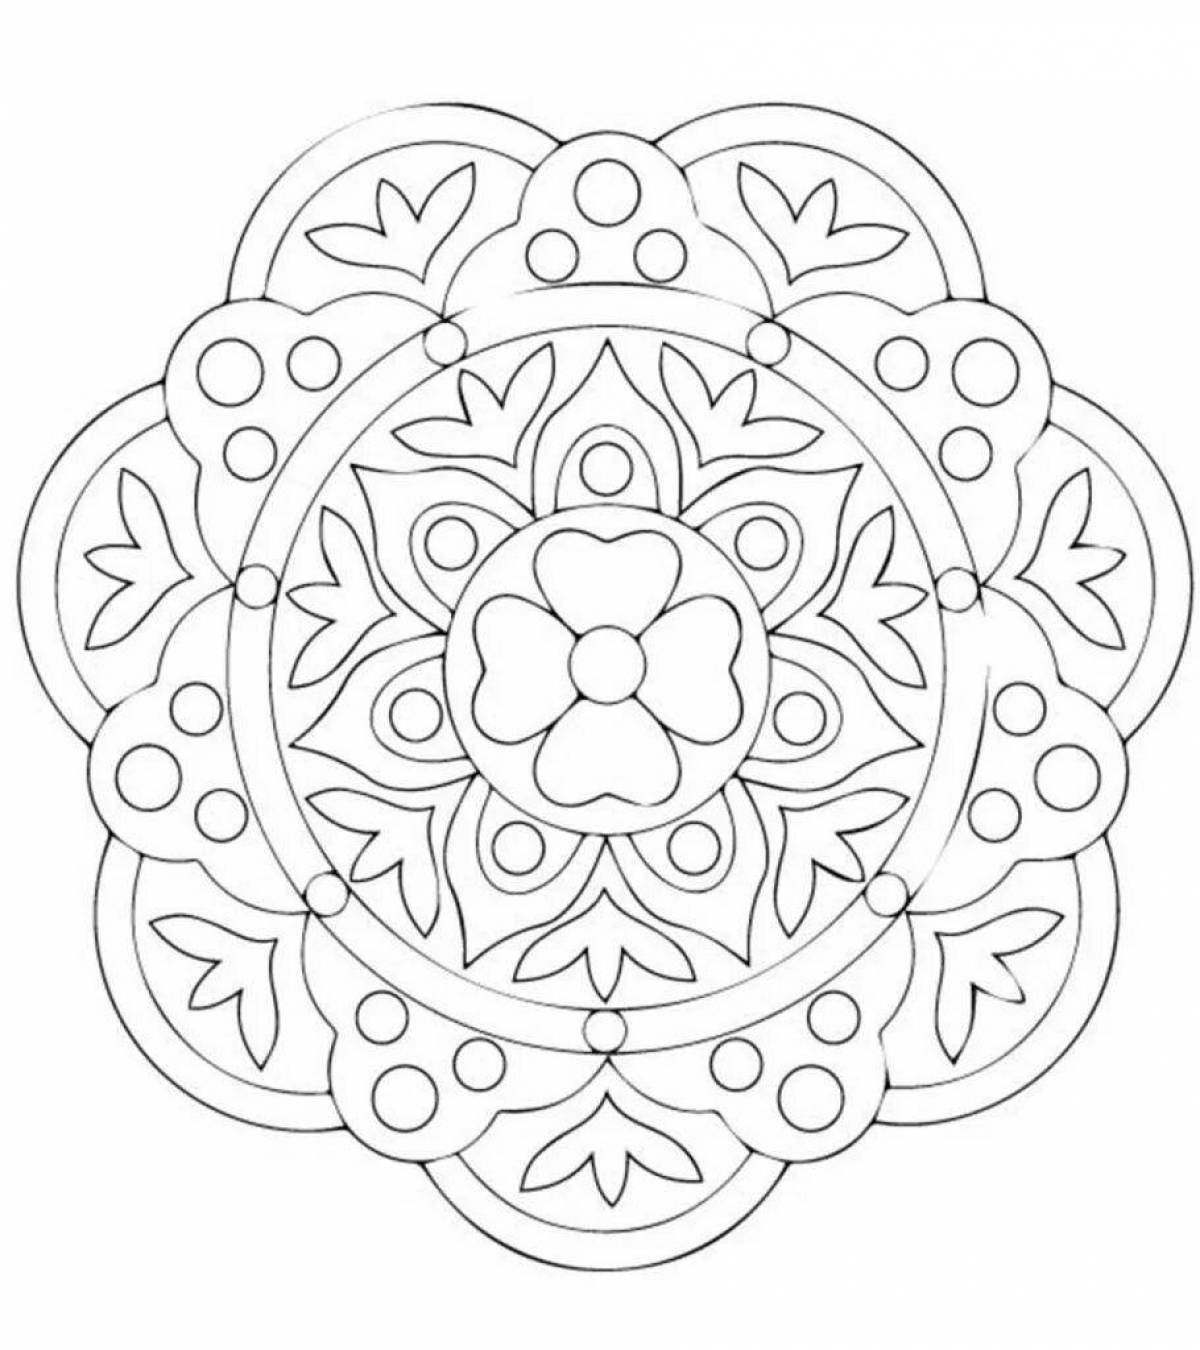 A fun coloring book with Tatar ornaments for kids